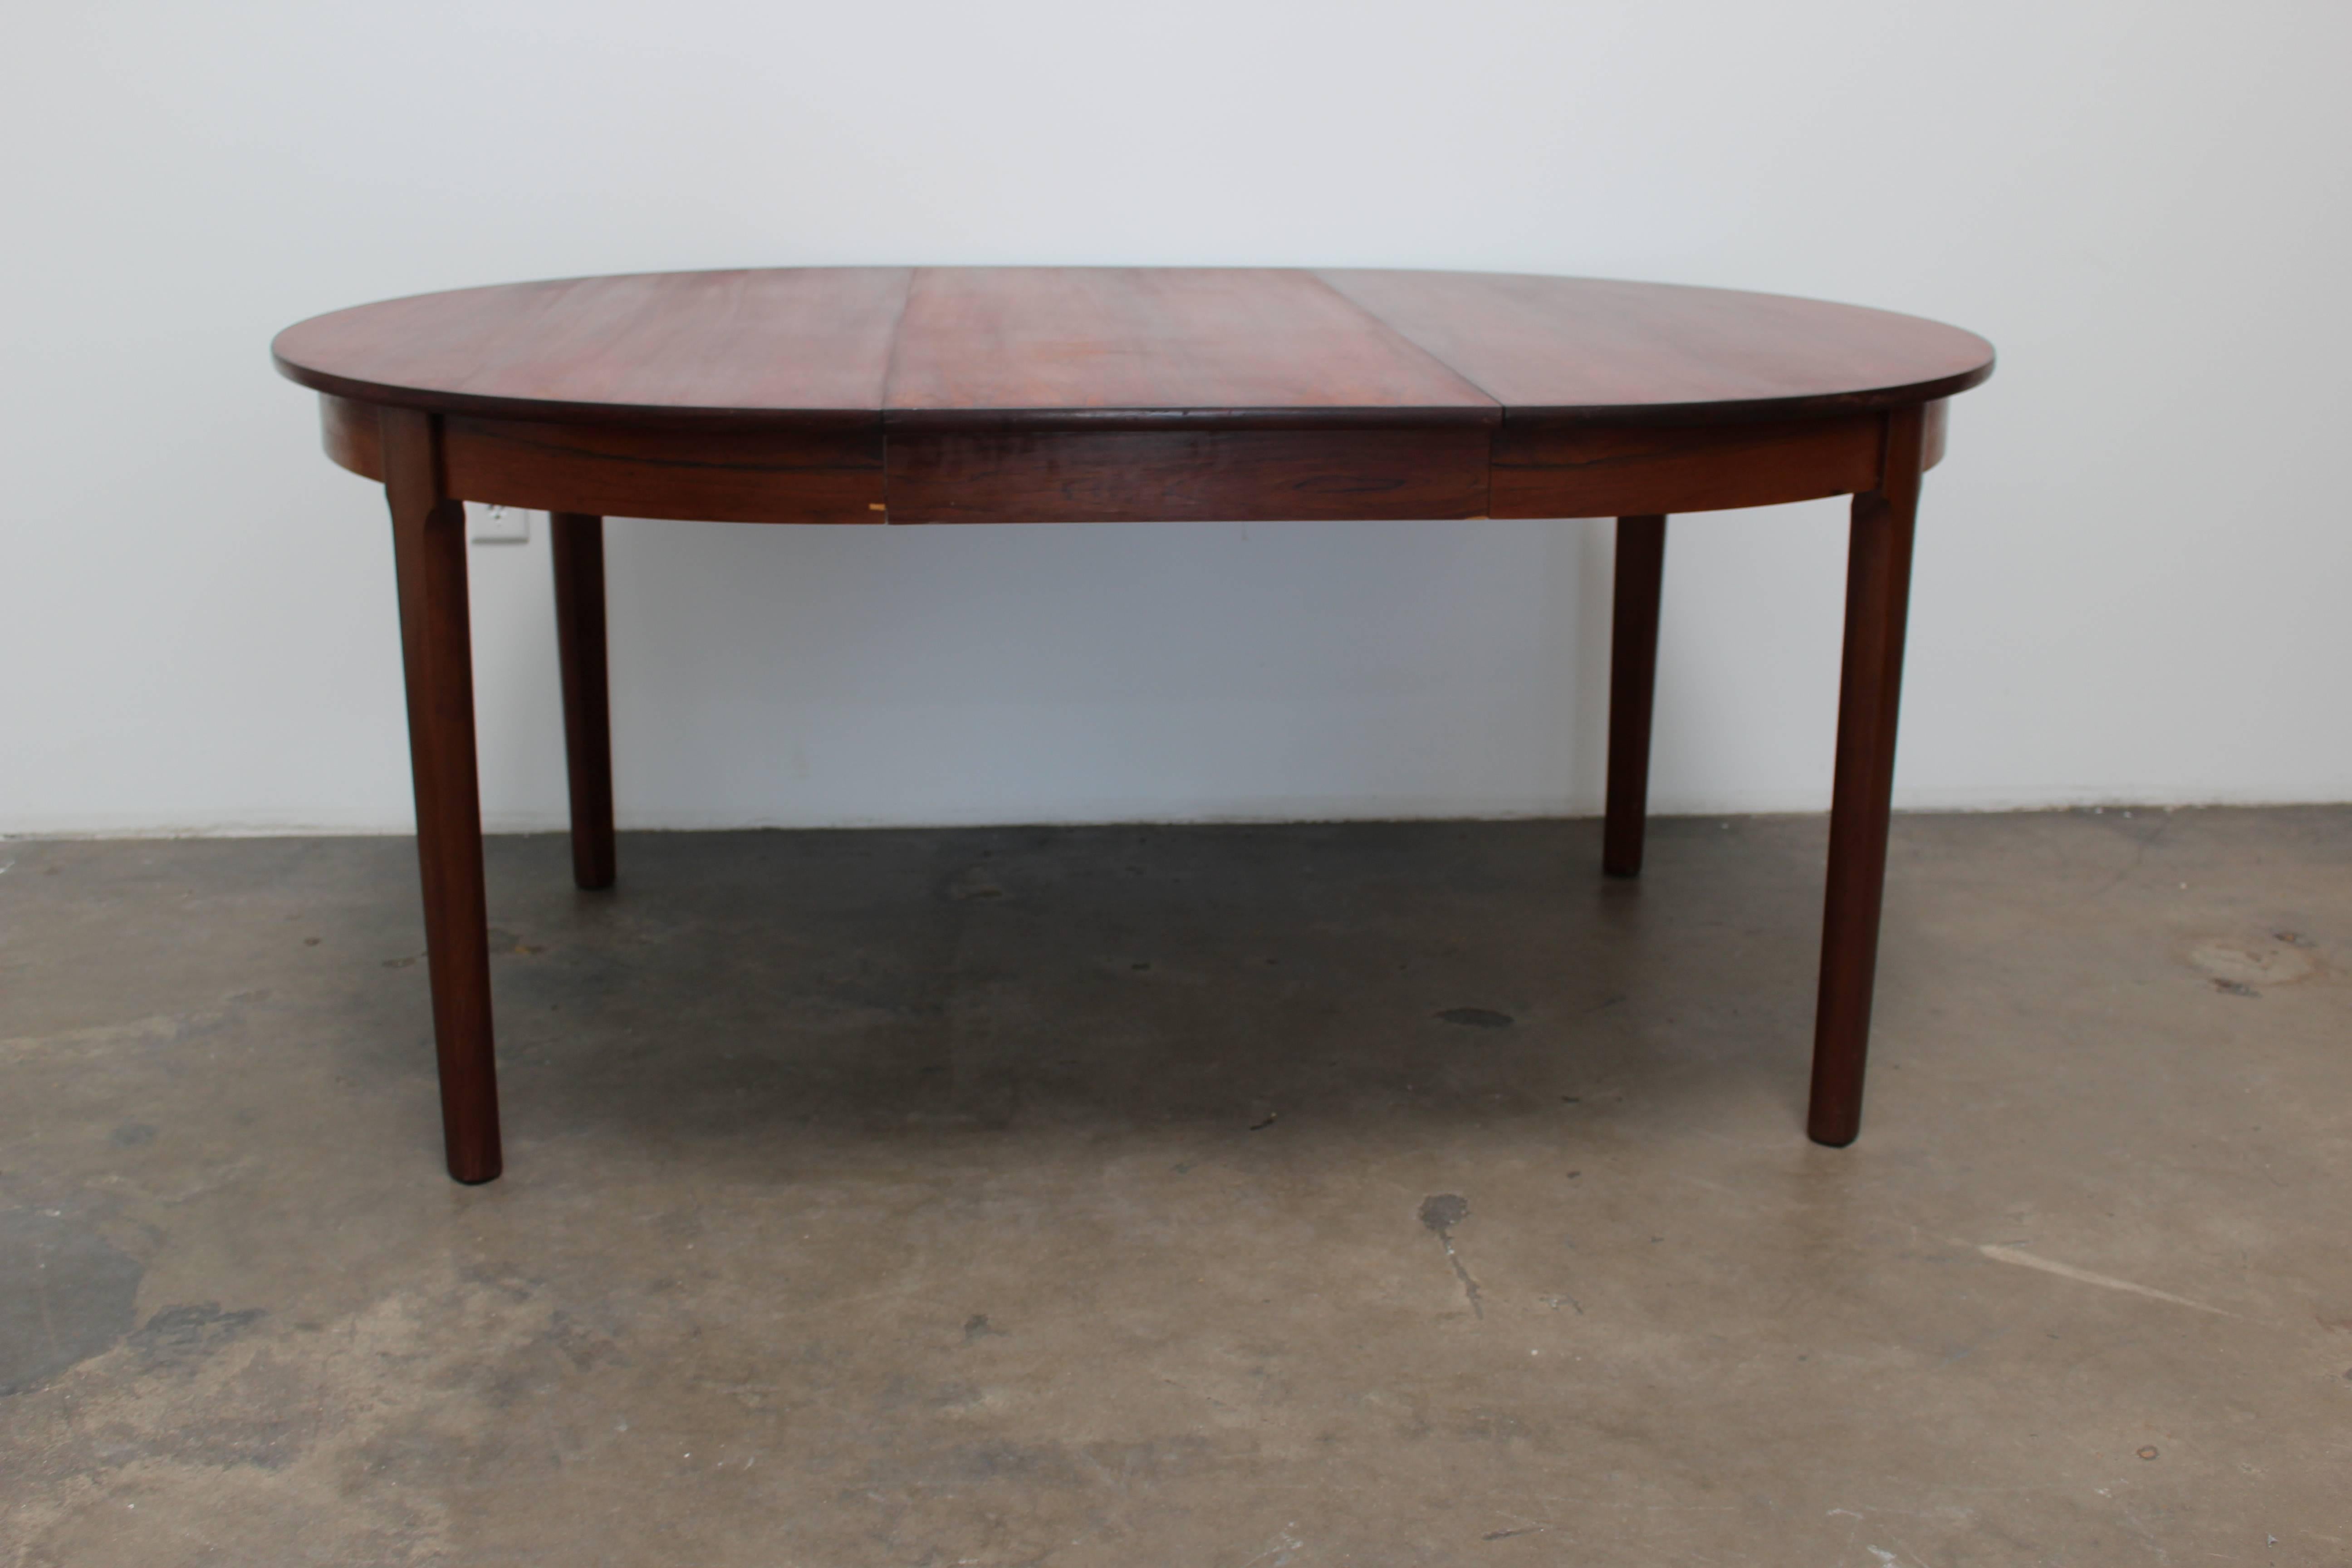 Danish Round Rosewood Dining Table, Scandinavian Modern, circa 1950s For Sale